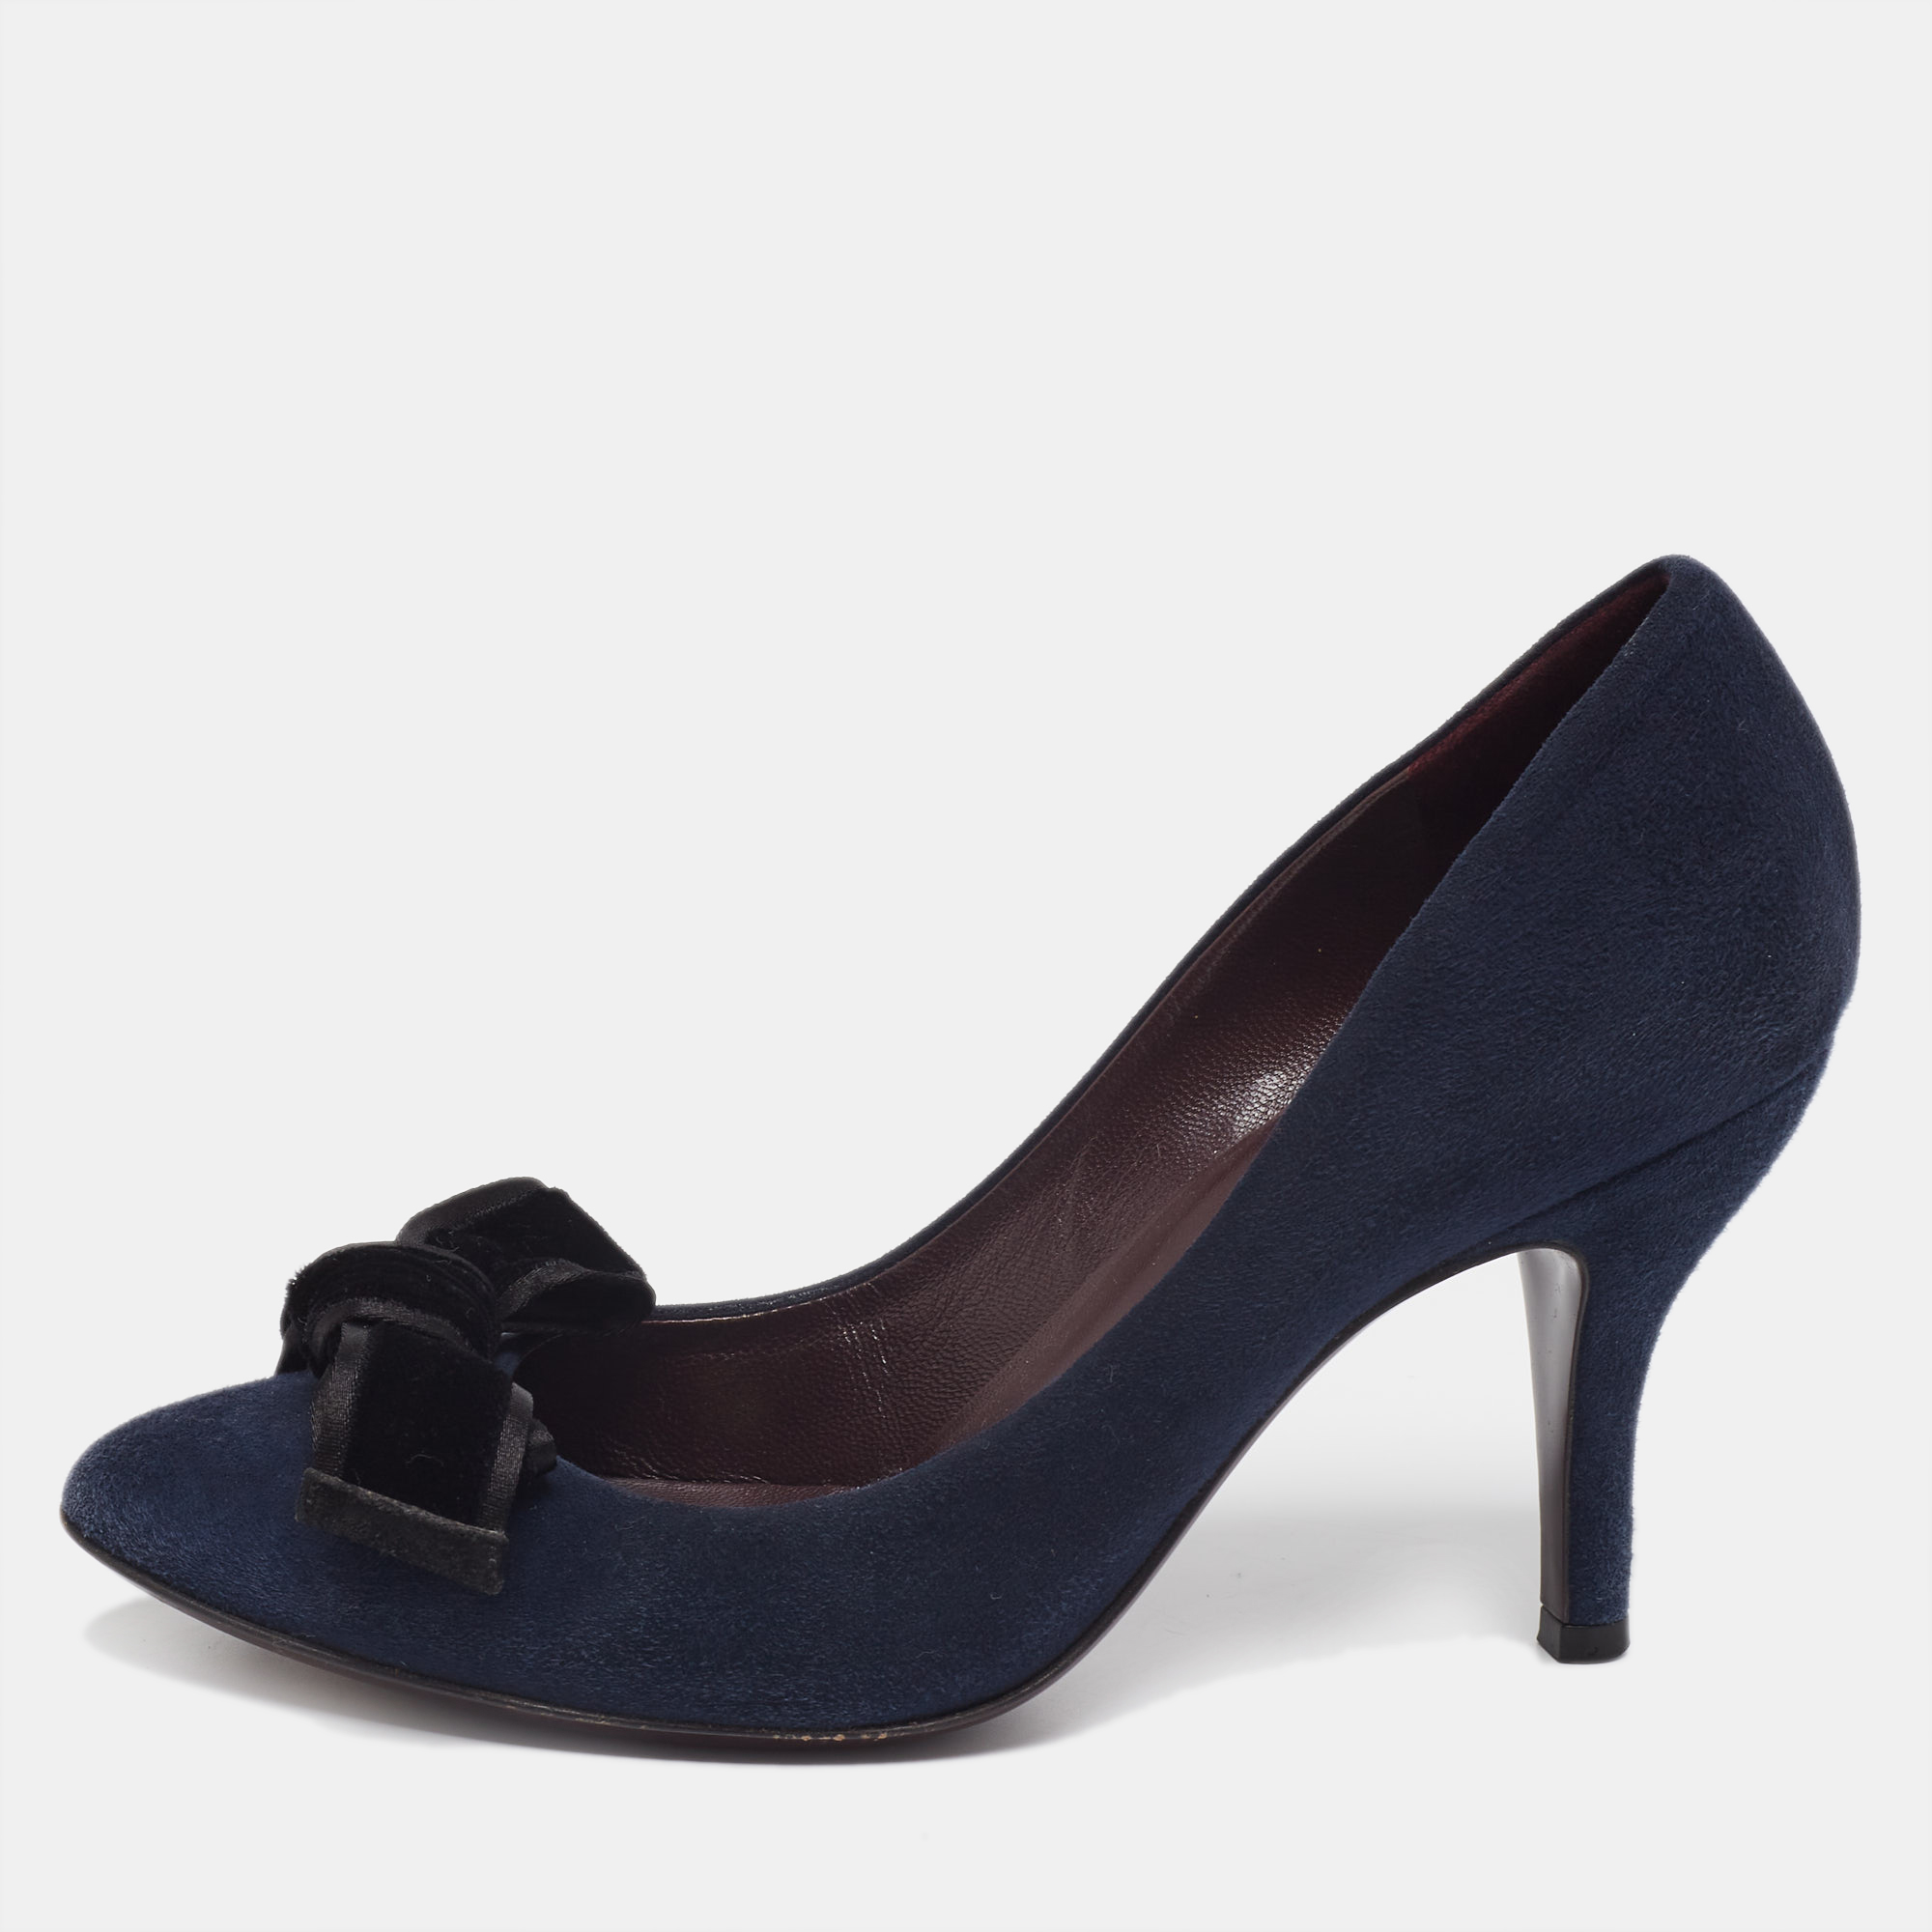 Pre-owned Gucci Navy Blue Suede Bow Round Toe Pumps Size 36.5